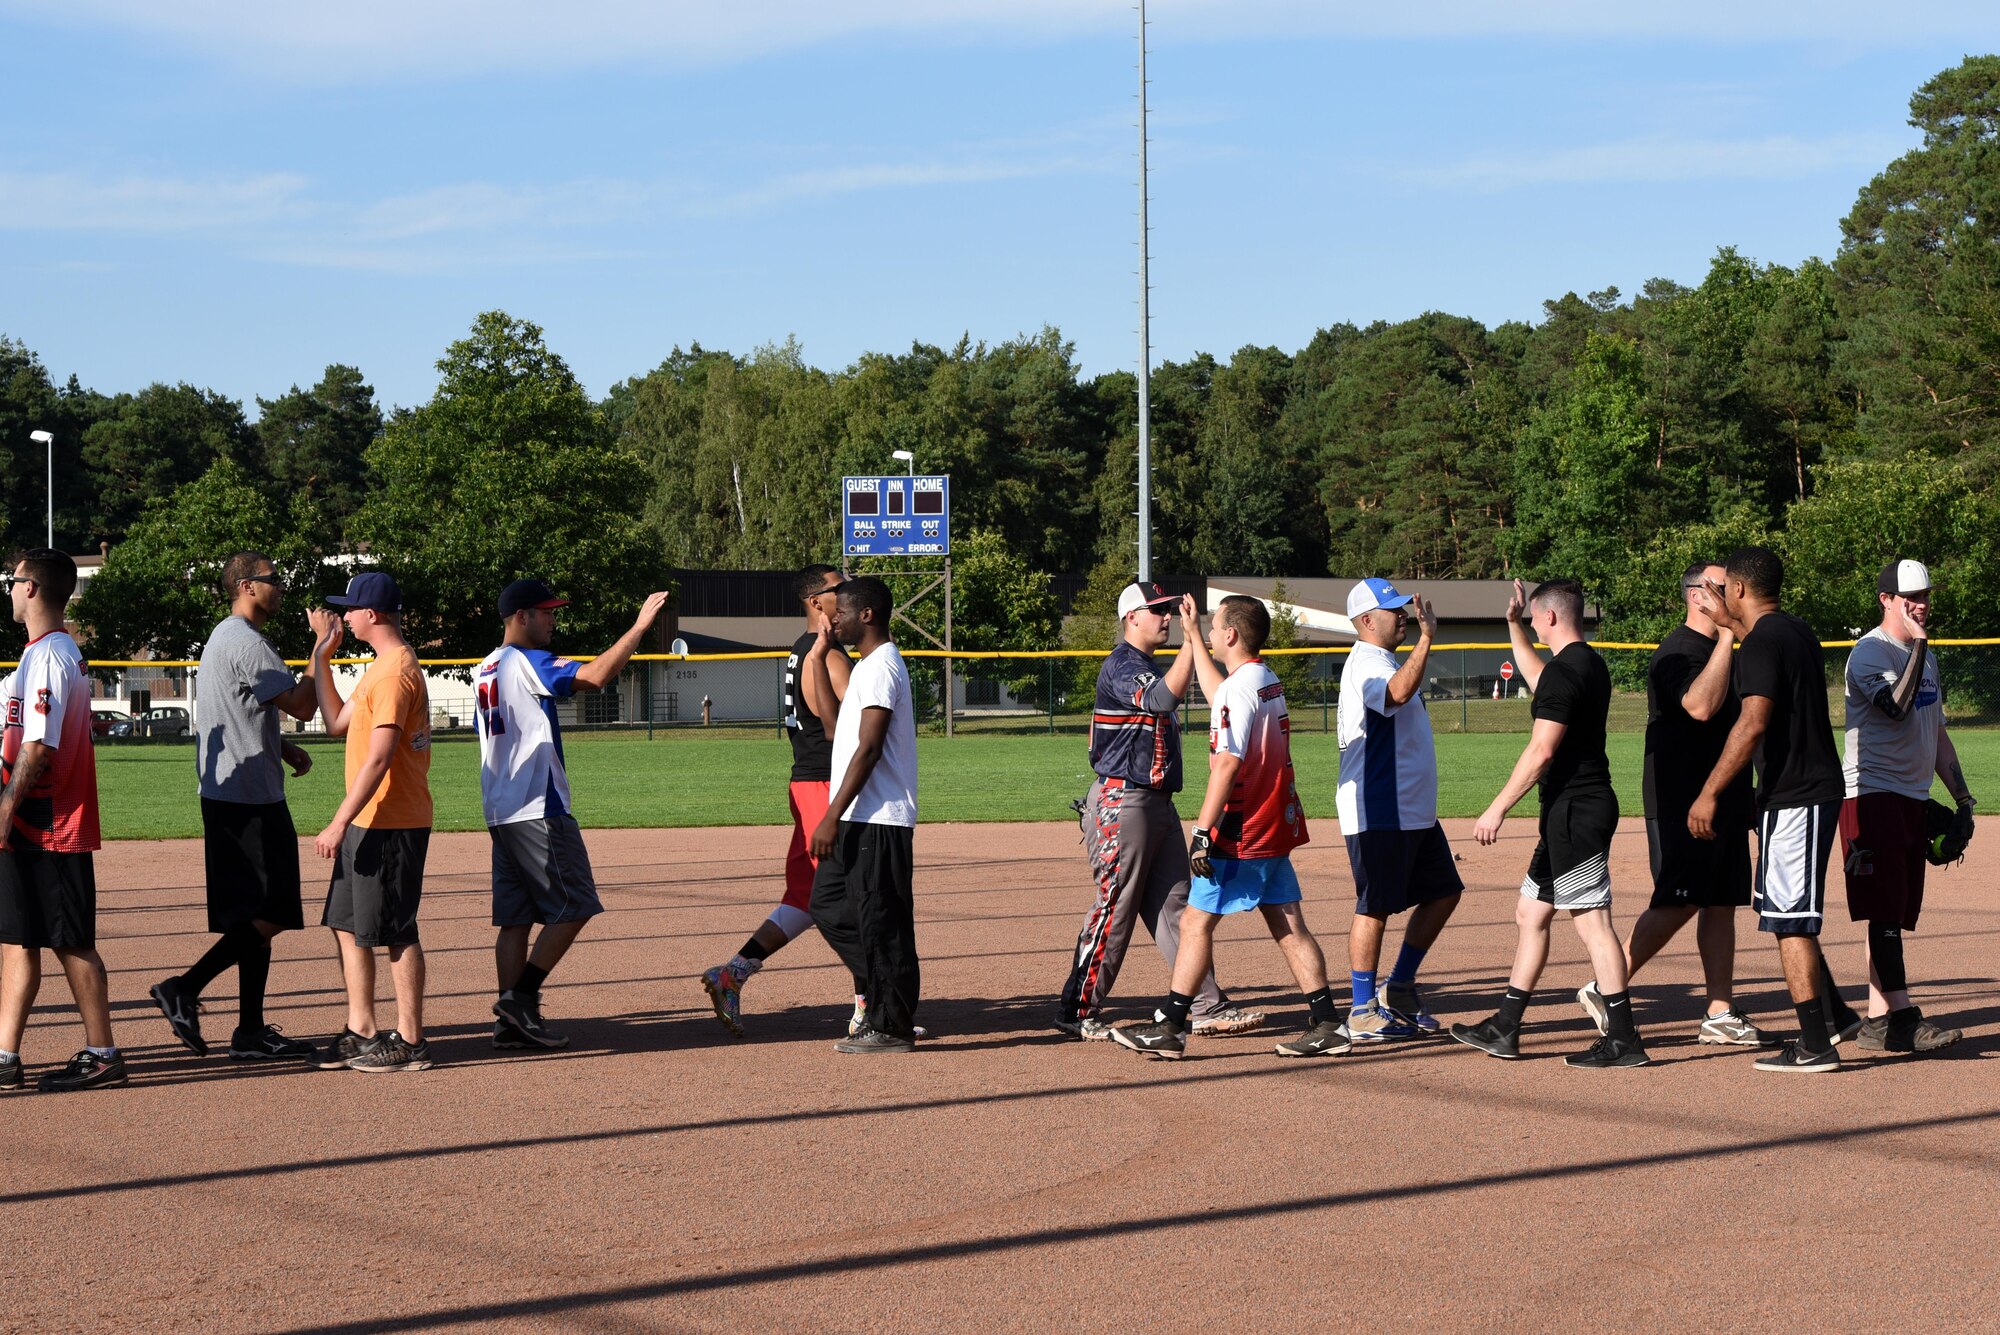 Players from opposing teams high-five one another to show good sportsmanship at the end of an intramural softball game Aug 22, 2017, on Ramstein Air Base, Germany. Professionalism and sportsmanship are two key factors of the intramural sports system that help to boost morale. (U.S. Air Force photo/Airman 1st Class Milton Jr. Hamilton)